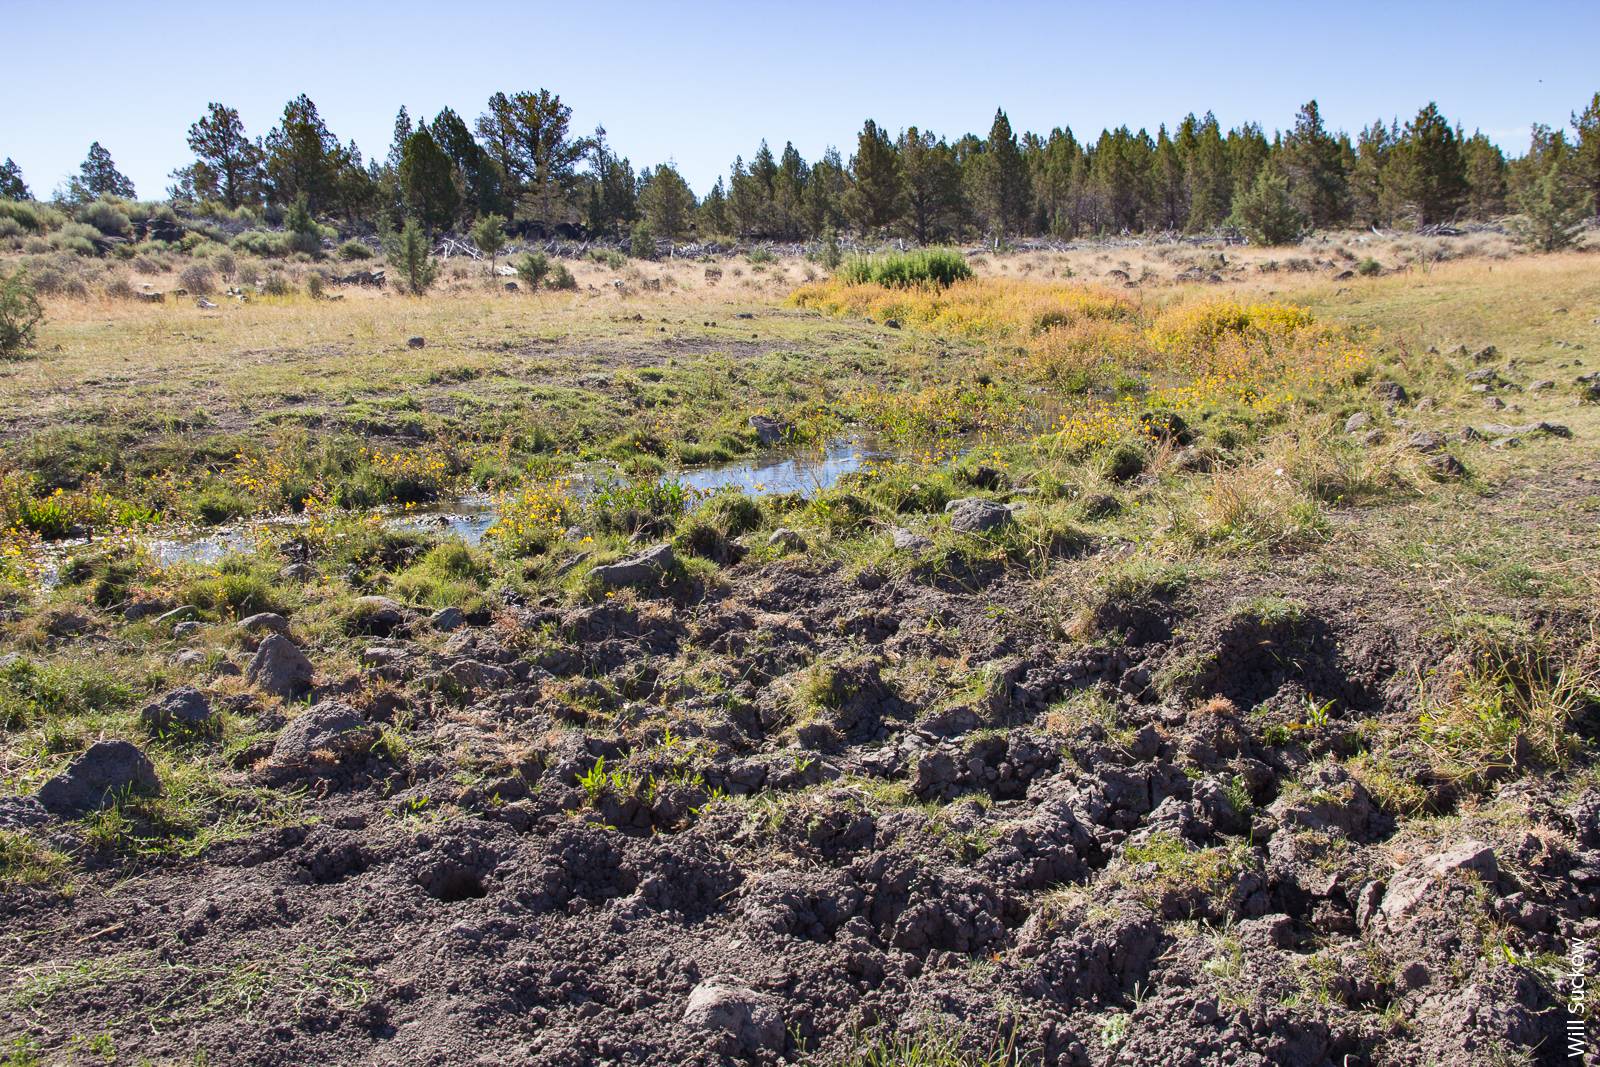 Wild horse impacts near Bottle Springs, Modoc National Forest.